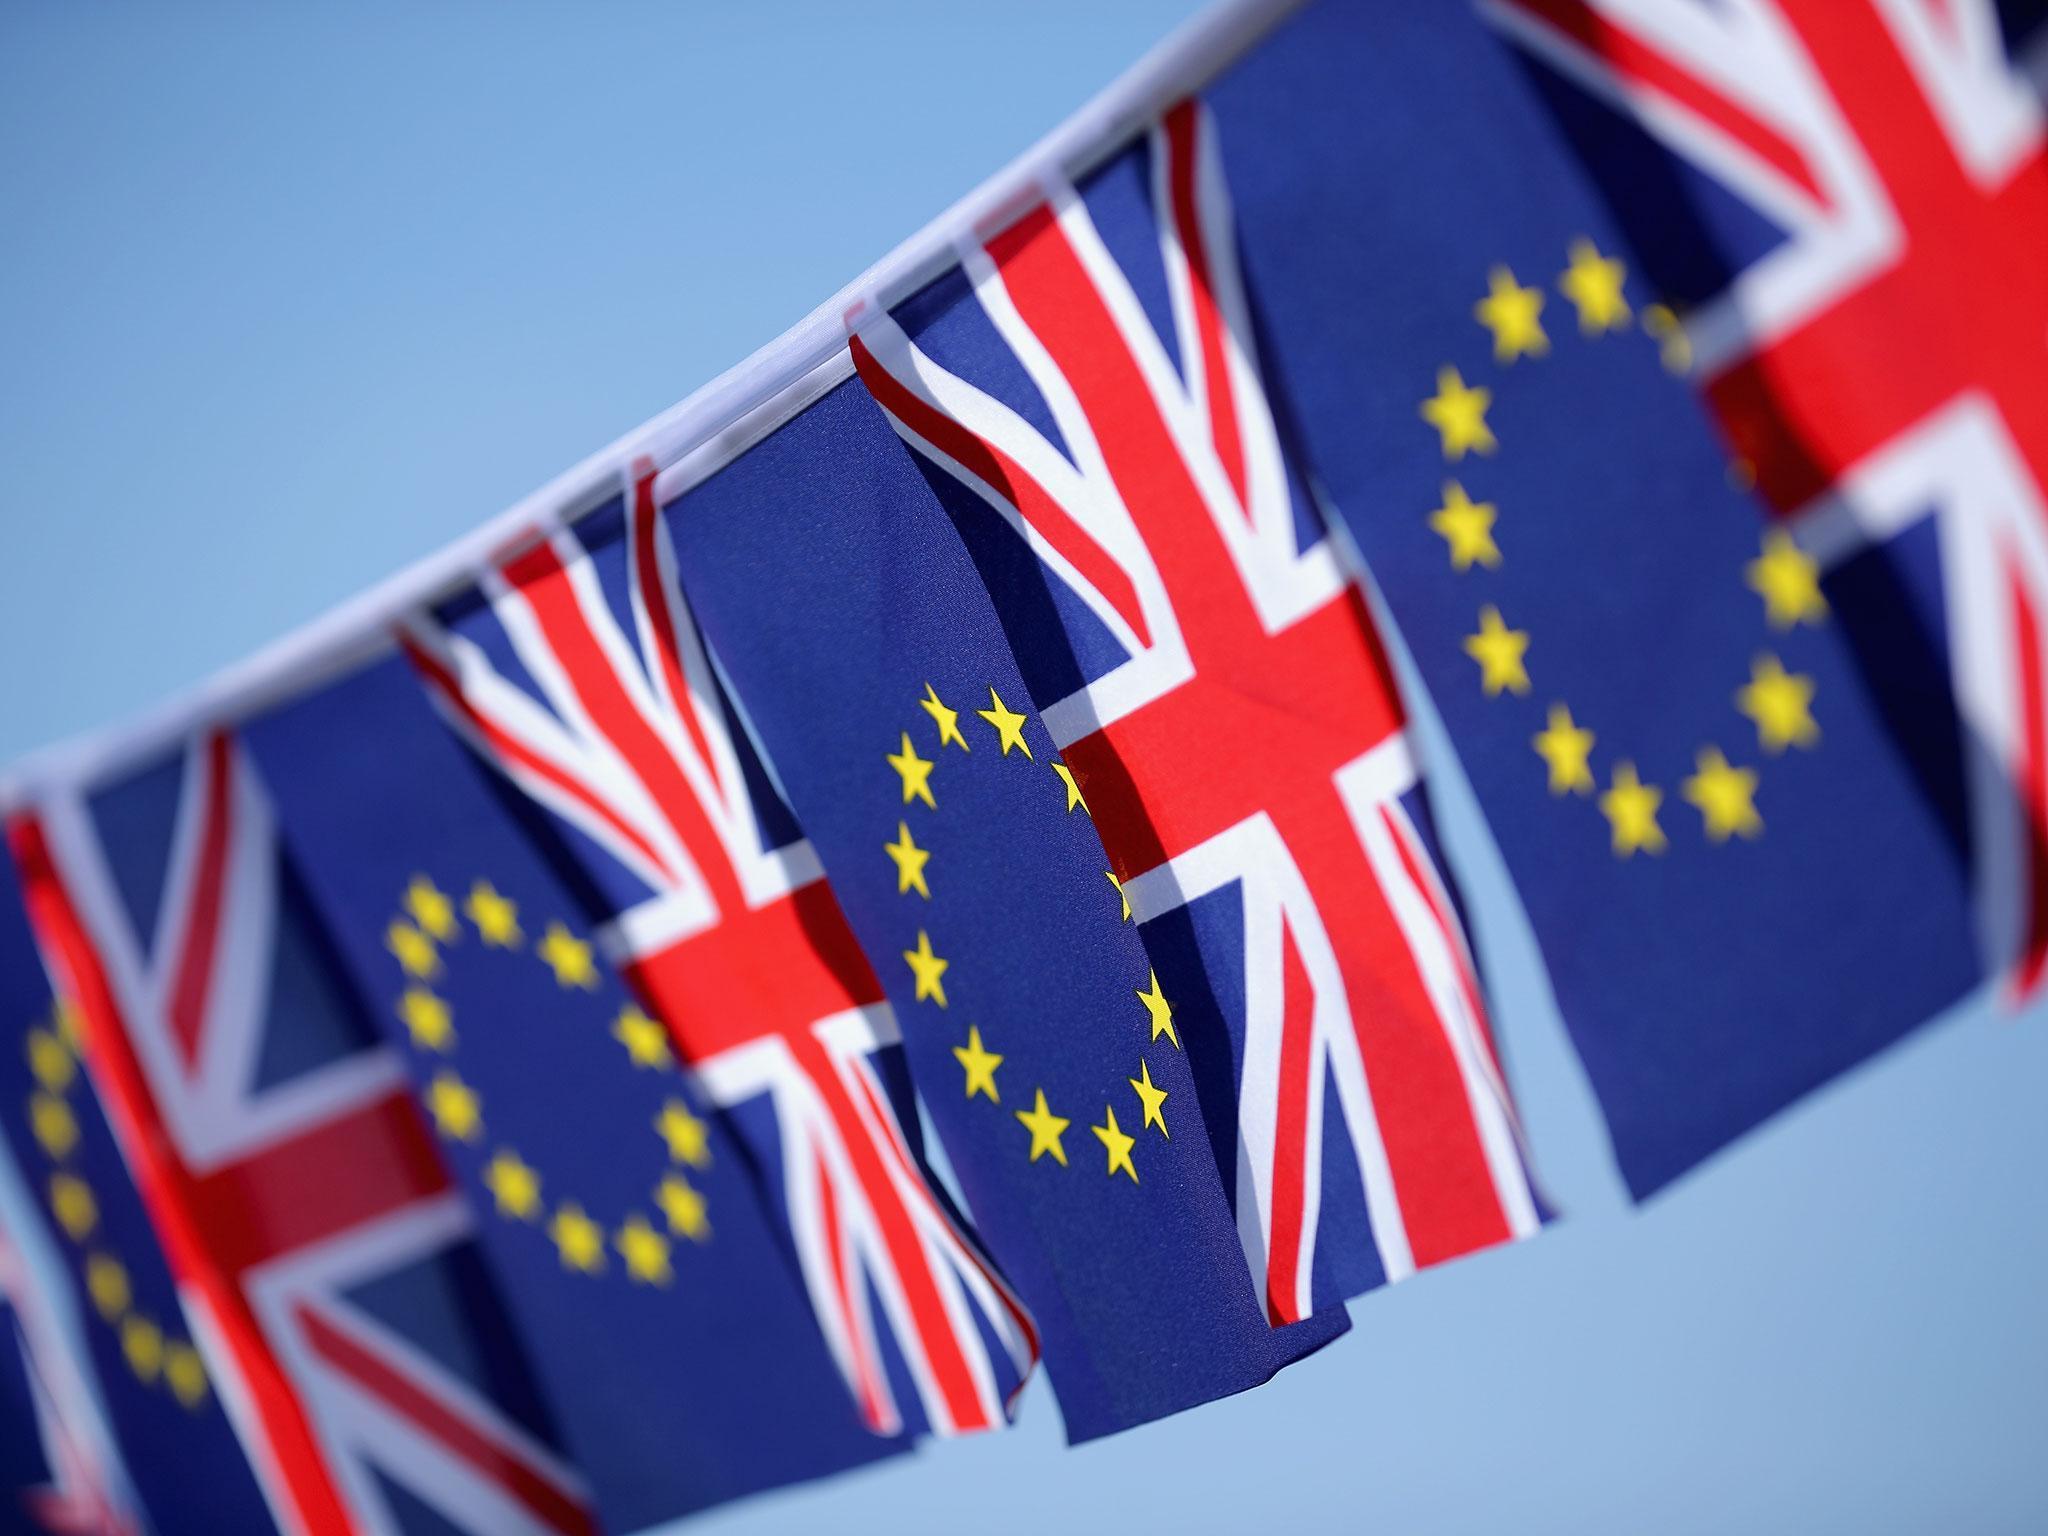 The EU referendum vote will take place on Thursday 23rd June